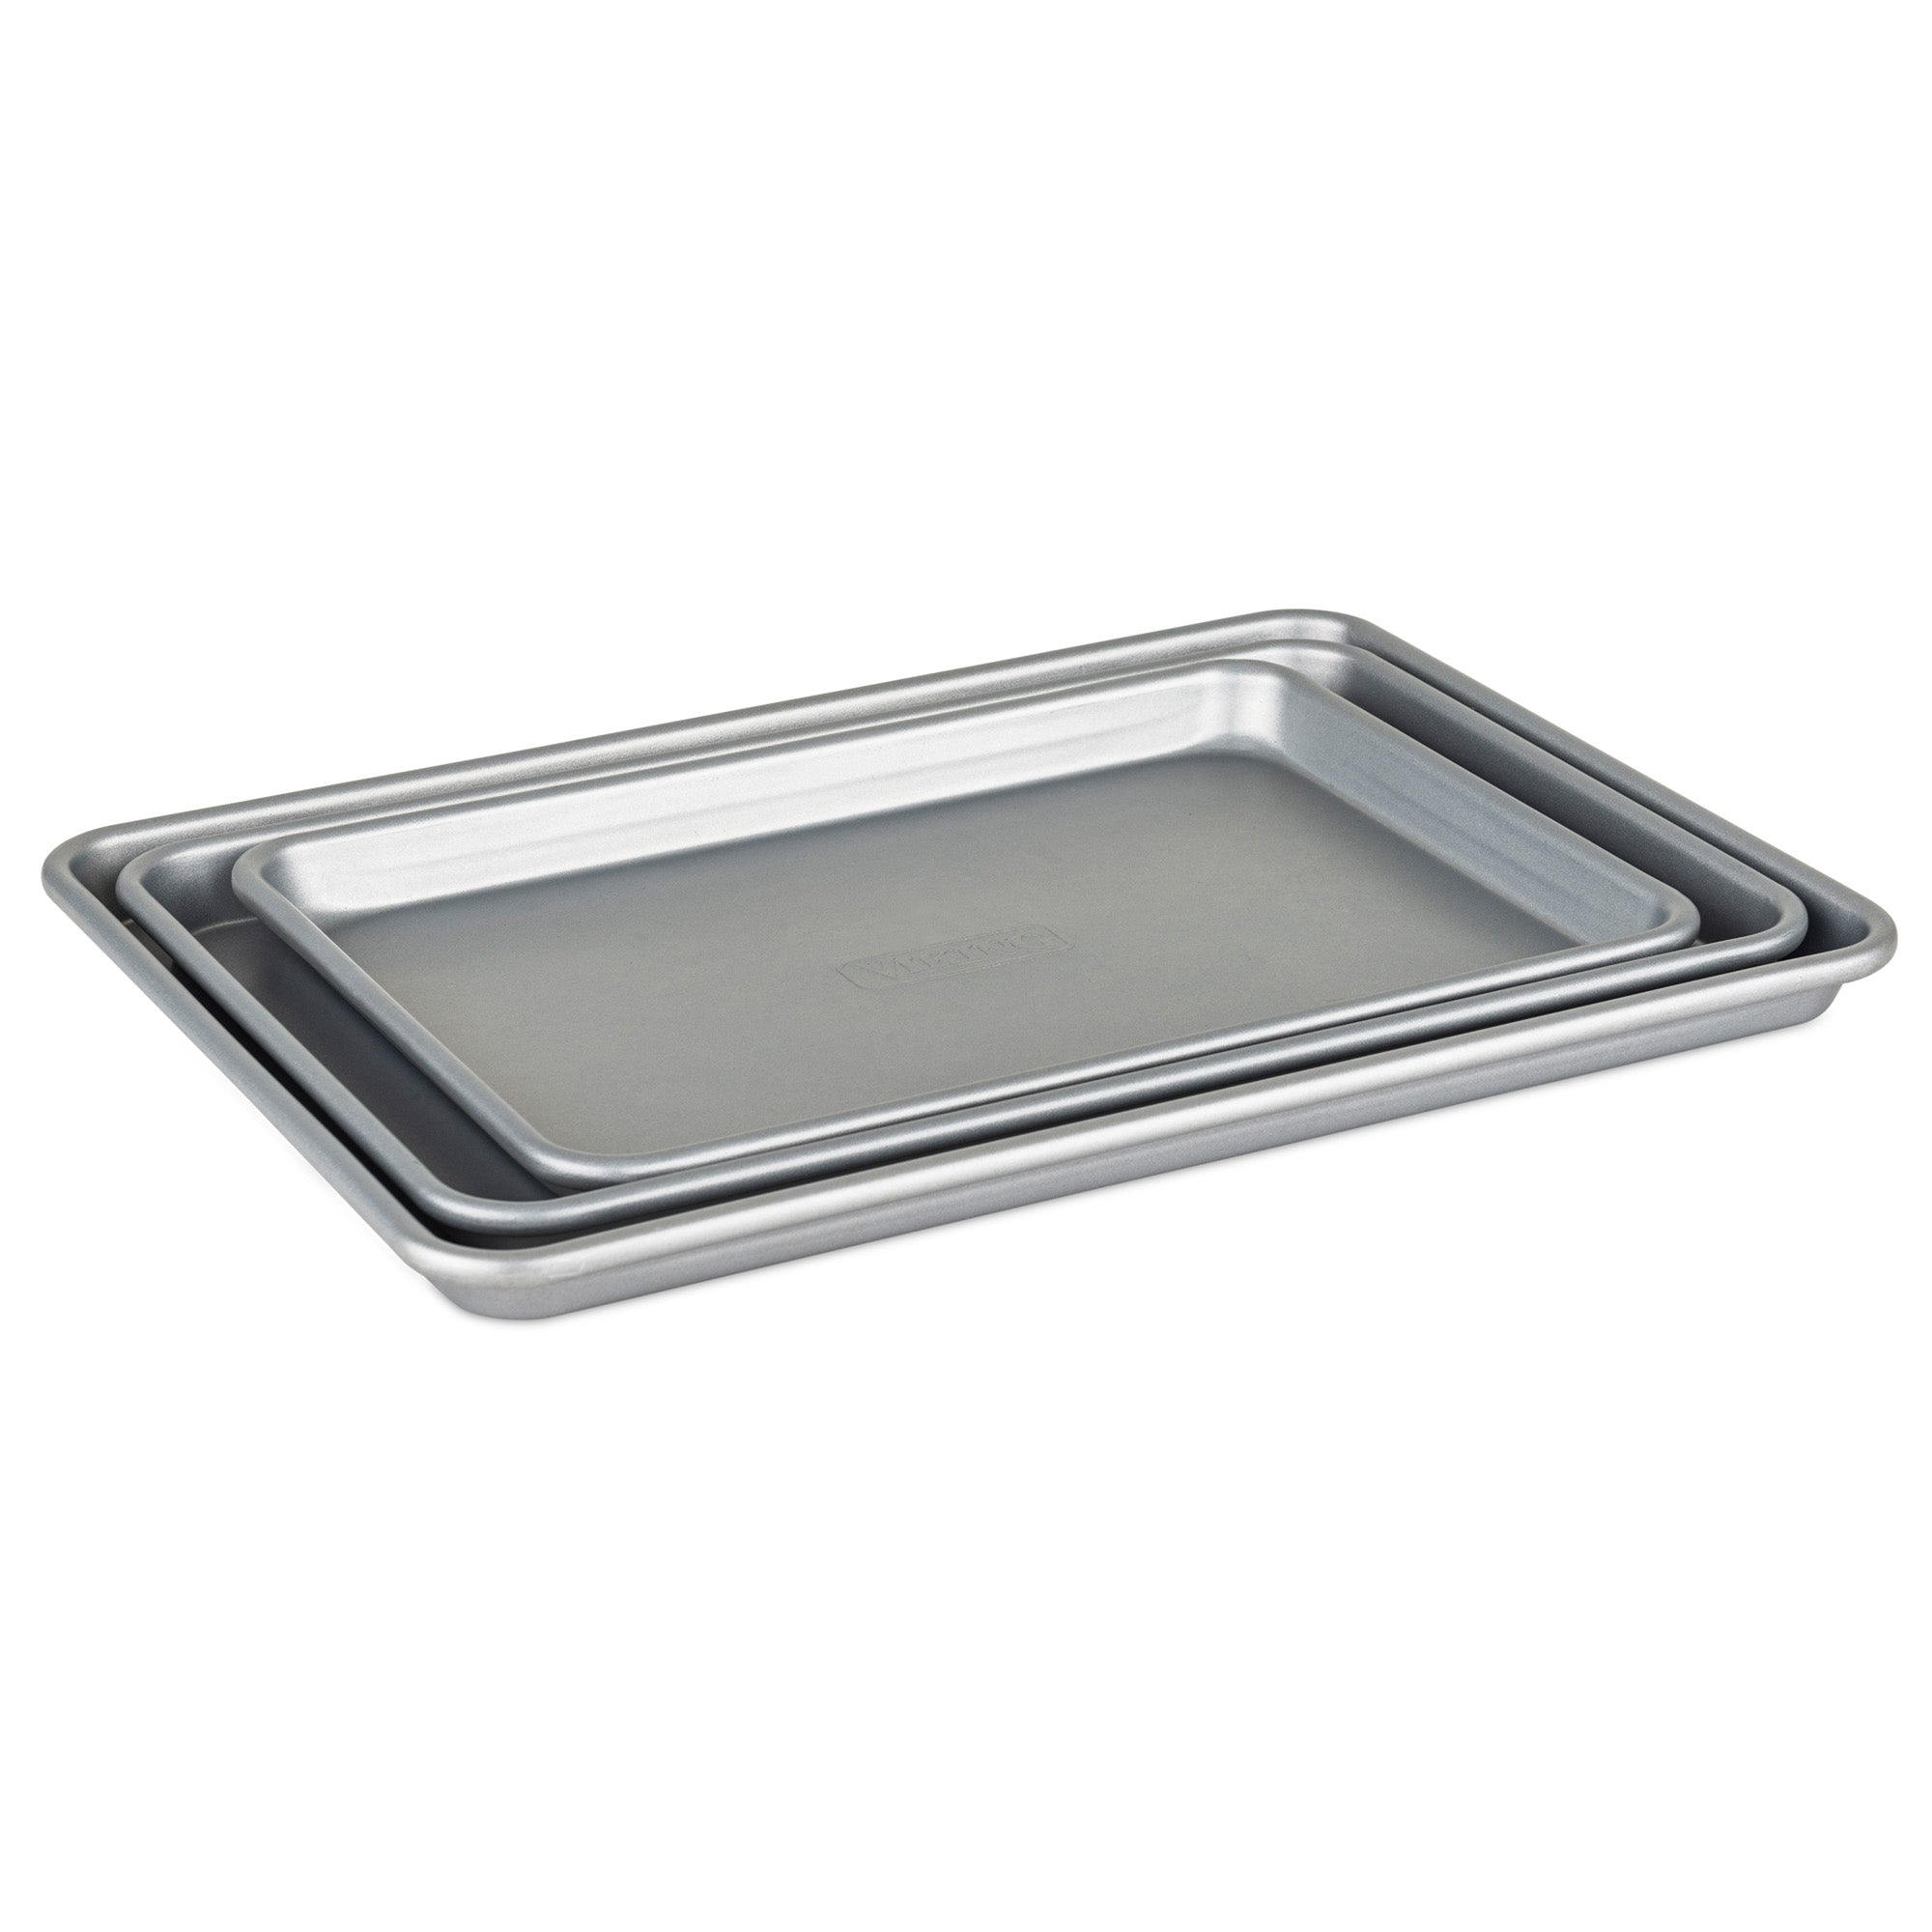 Baking Tray Set Of 2, Stainless Steel Oven Tray, Small+medium